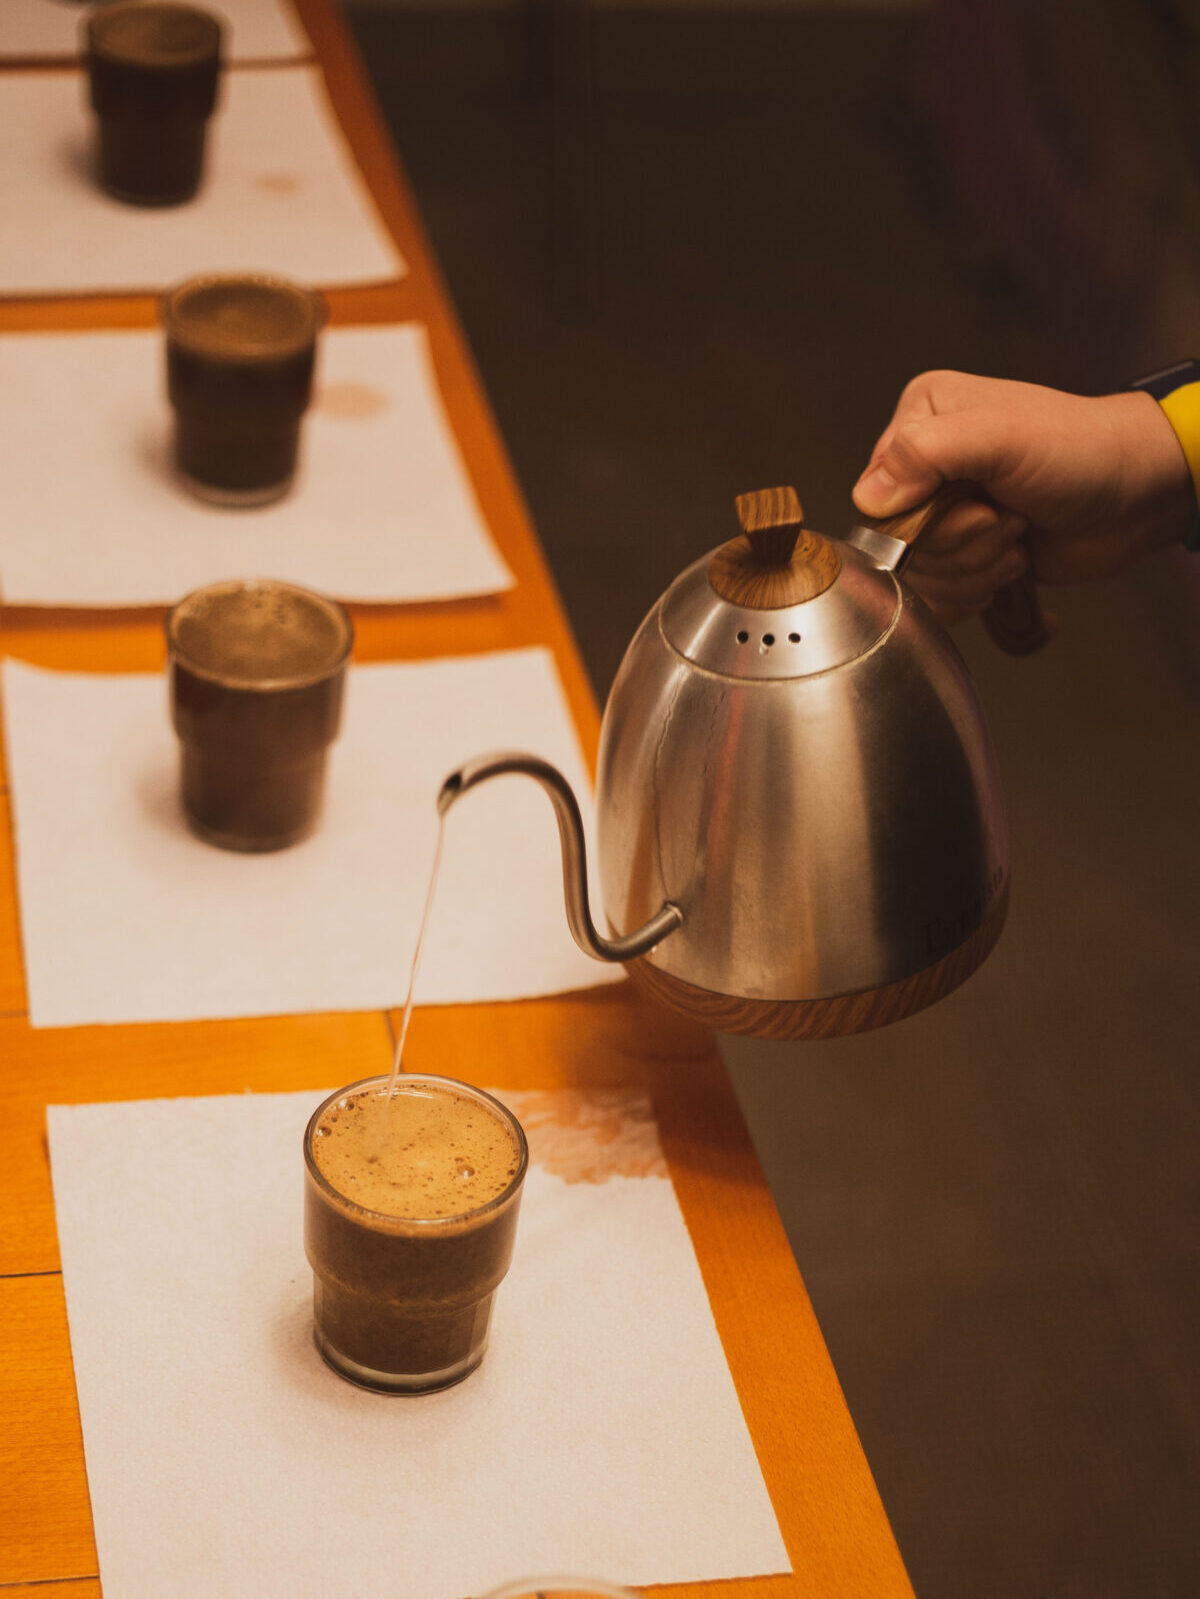 A hand pours hot water from a gooseneck kettle over coffee grounds into clear glass cups.